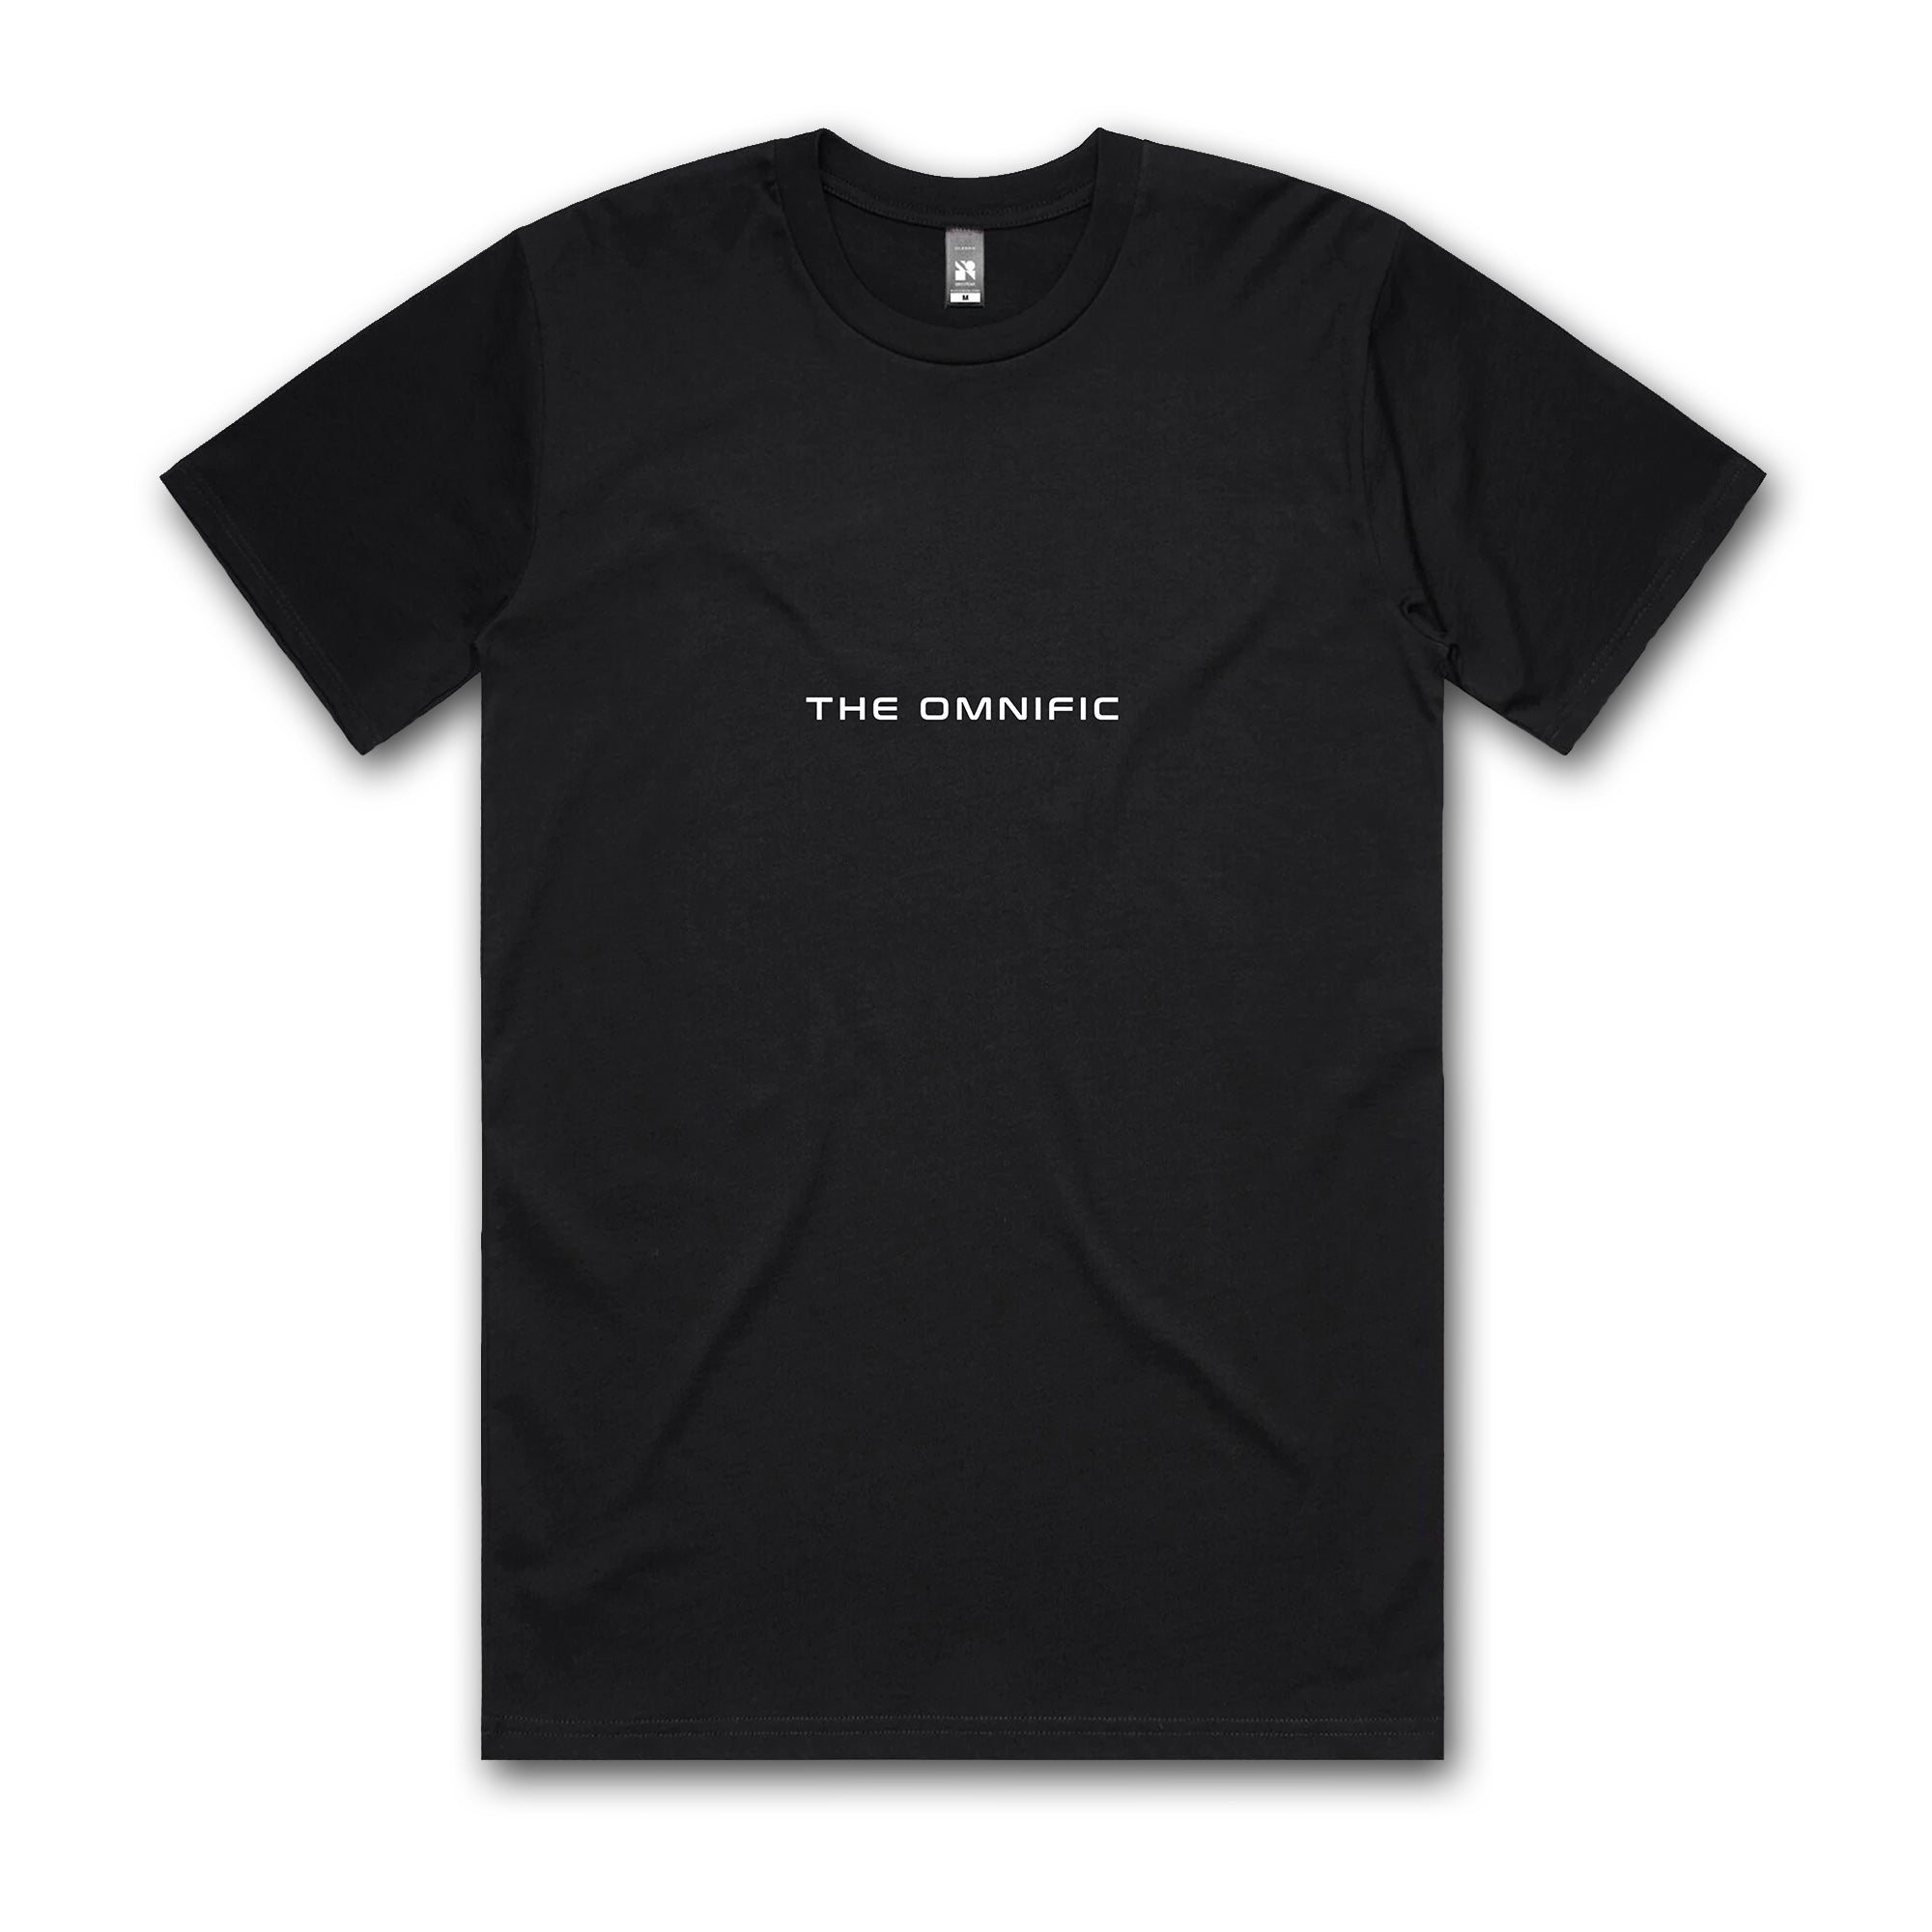 THE OMNIFIC // LOGO T-SHIRT